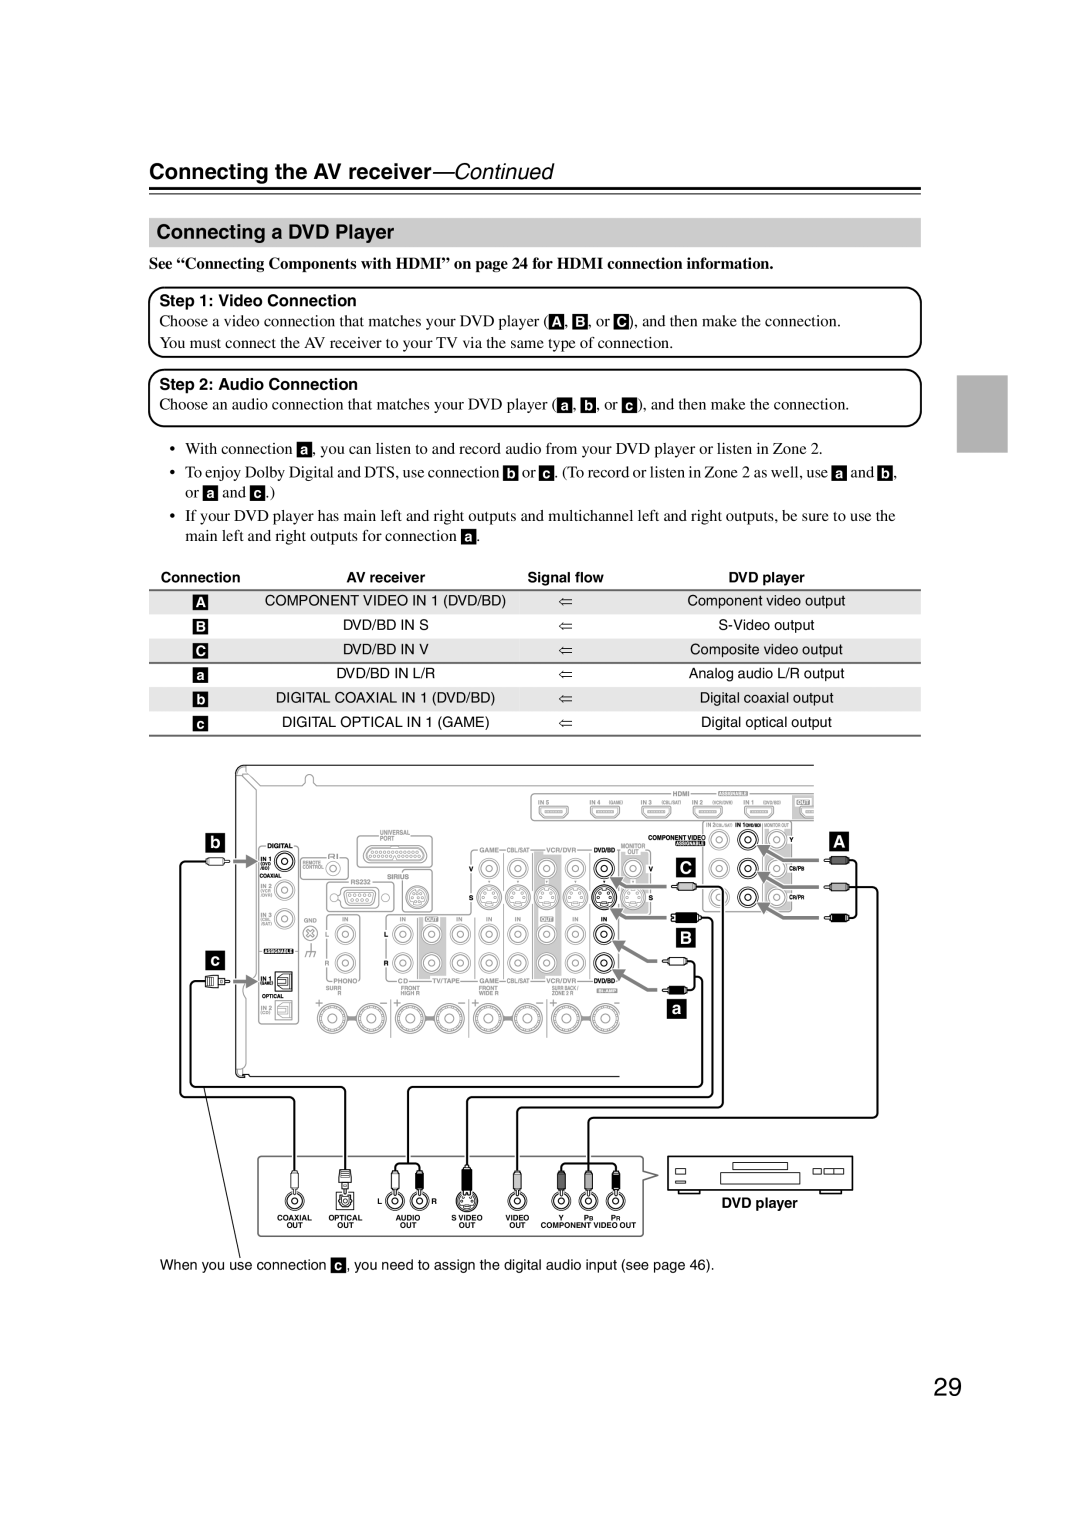 Onkyo TX-SR707 instruction manual Connecting a DVD Player, A C B, Connecting the AV receiver-Continued 